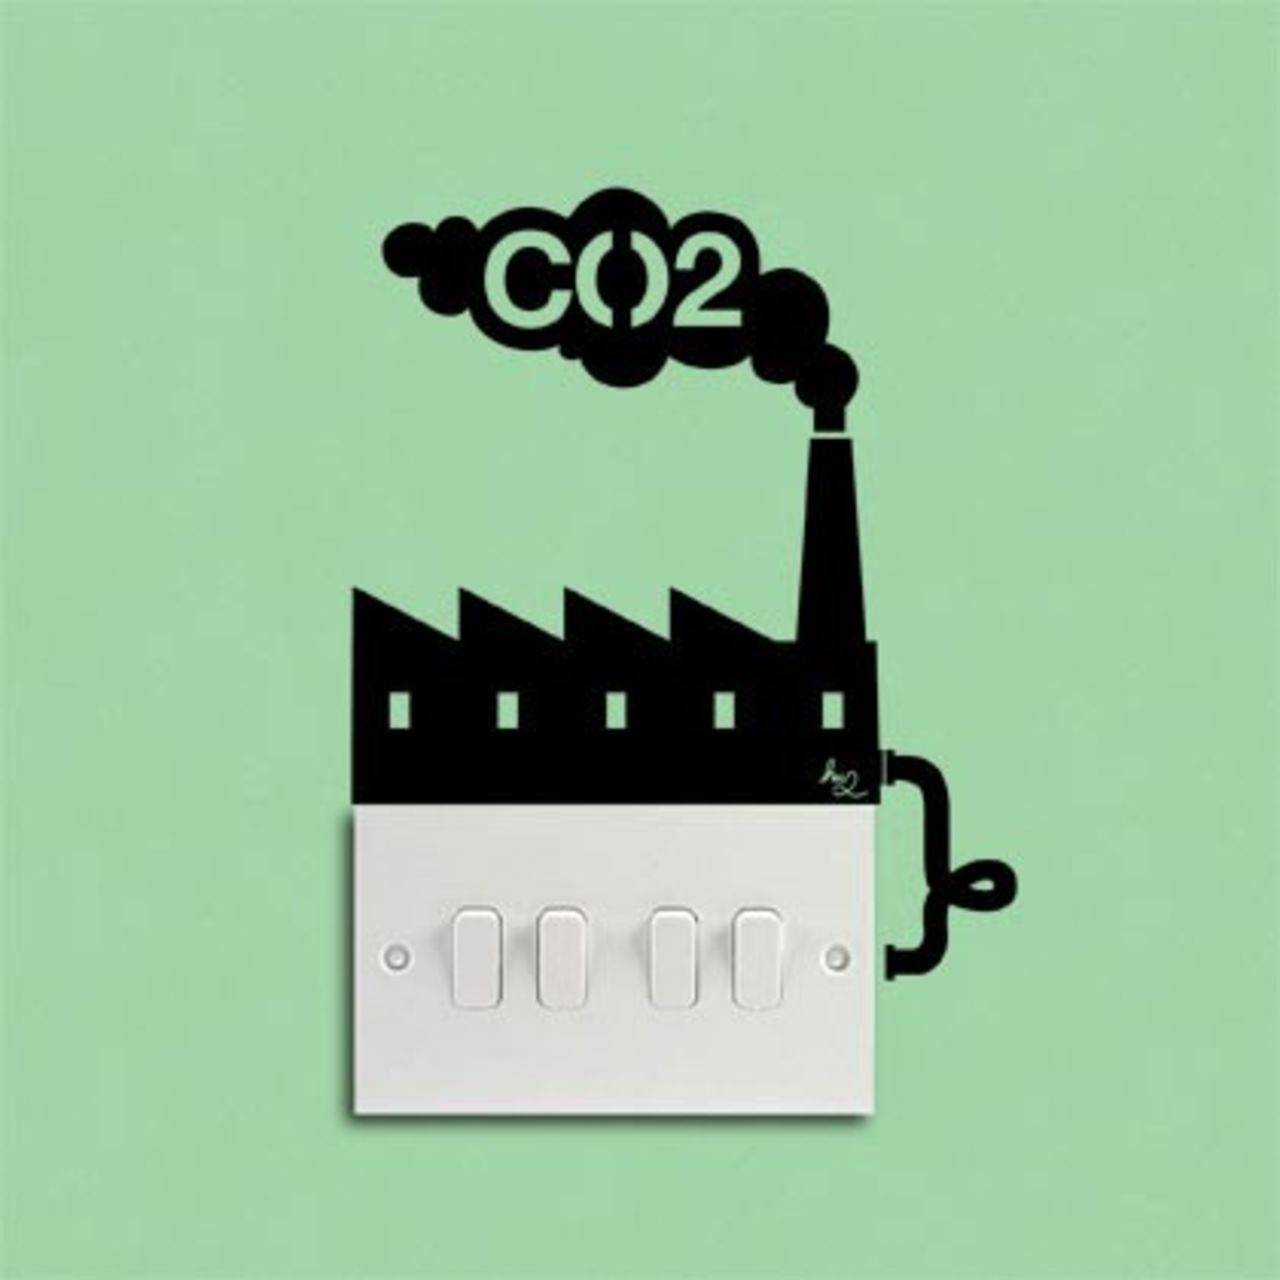 A wall sticker from London-based design and sustainbility outfit Hu2 brings home the carbon cost of keeping the lights on.